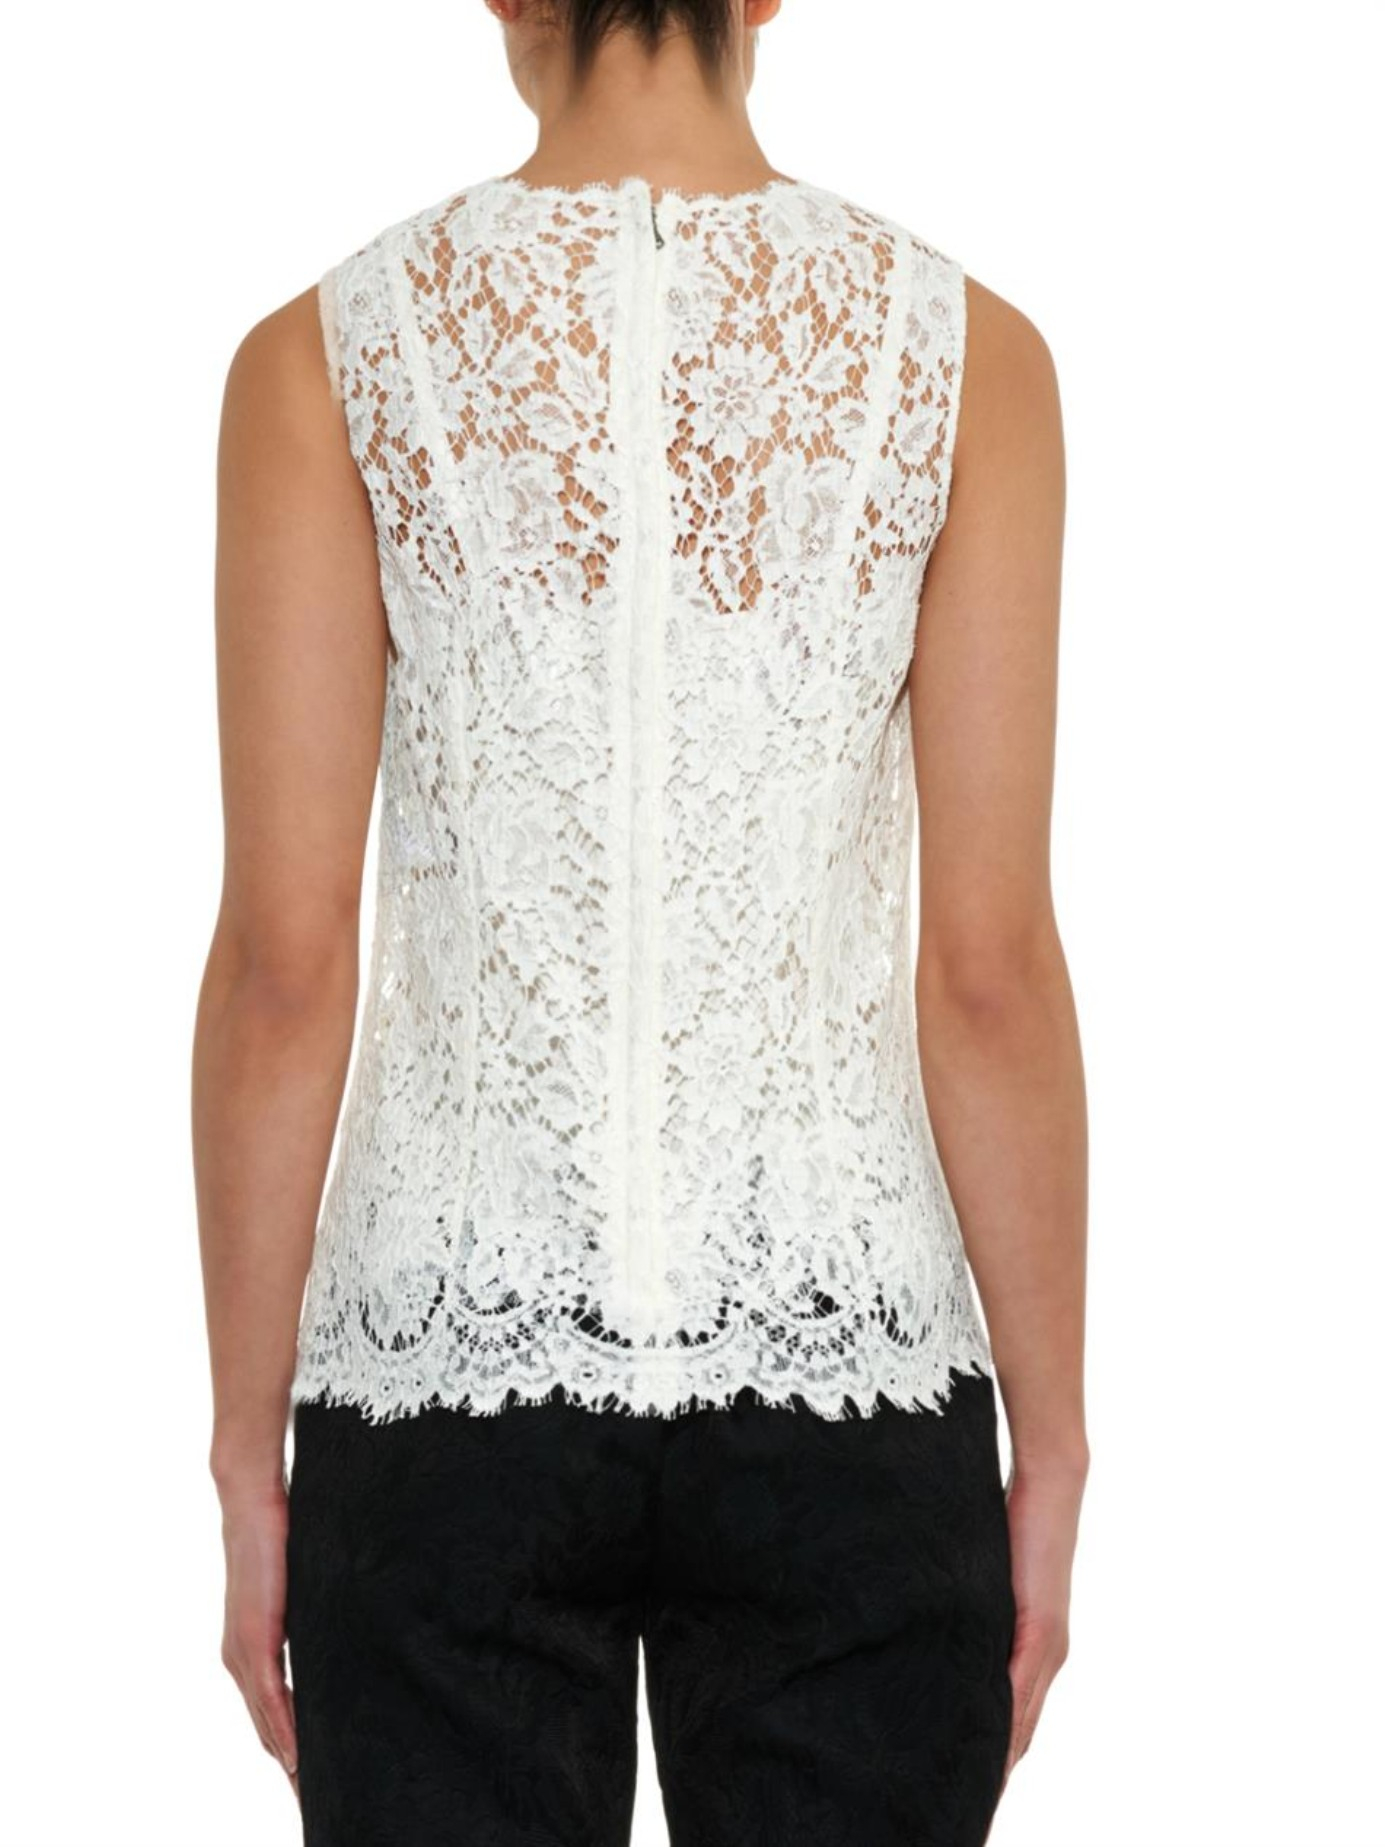 Dolce & Gabbana Sleeveless Lace Top in White - Lyst